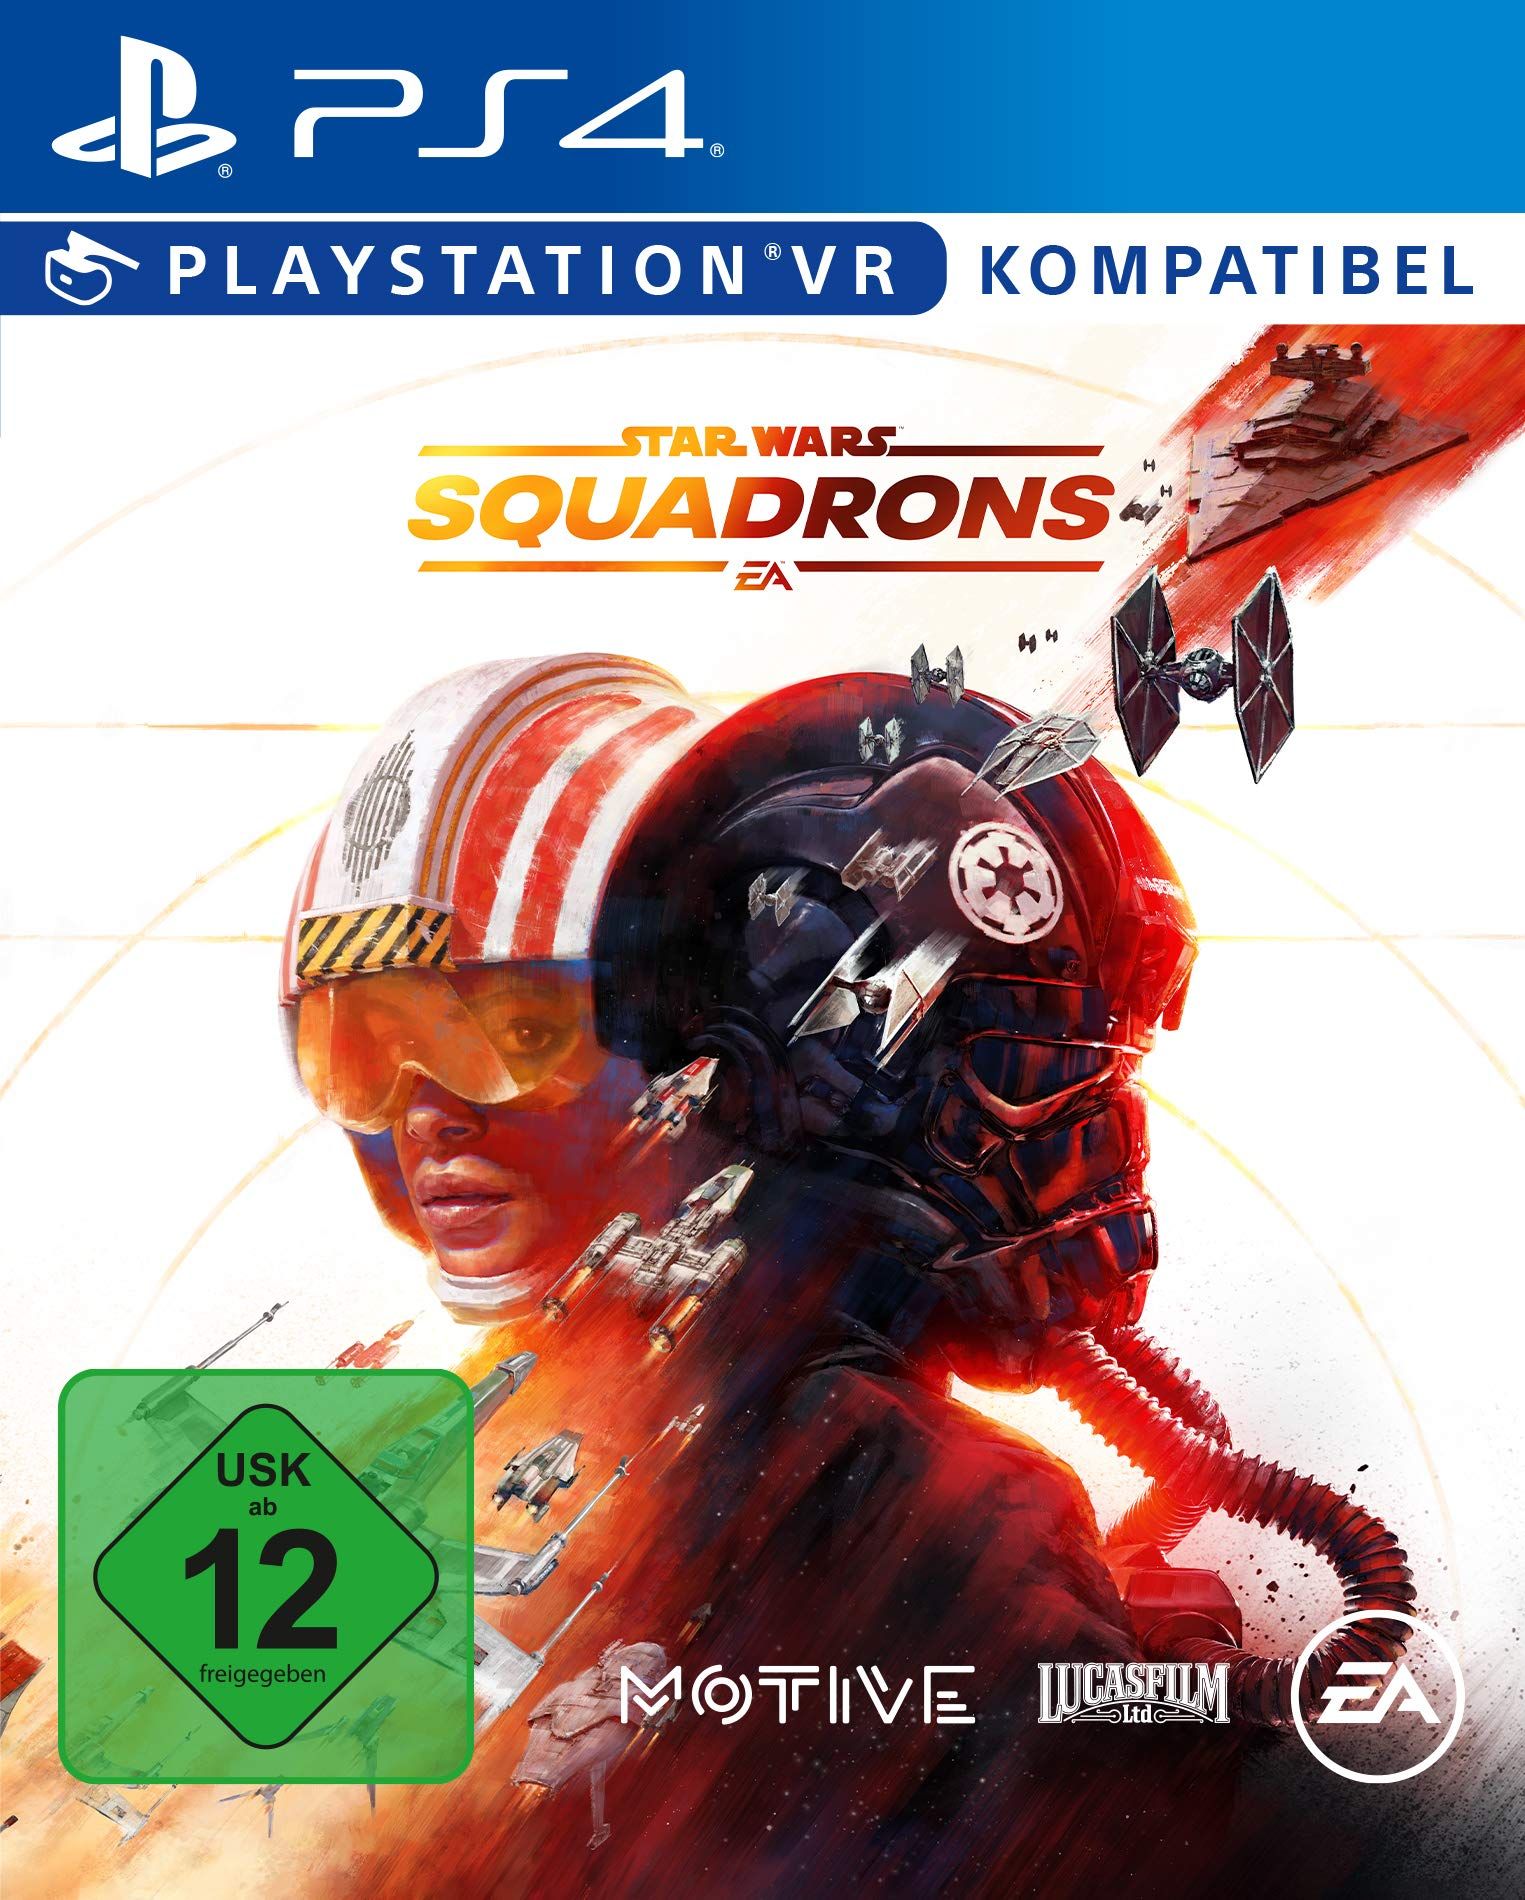 Ea Games Star Wars Squadrons Ps4 Usk 16